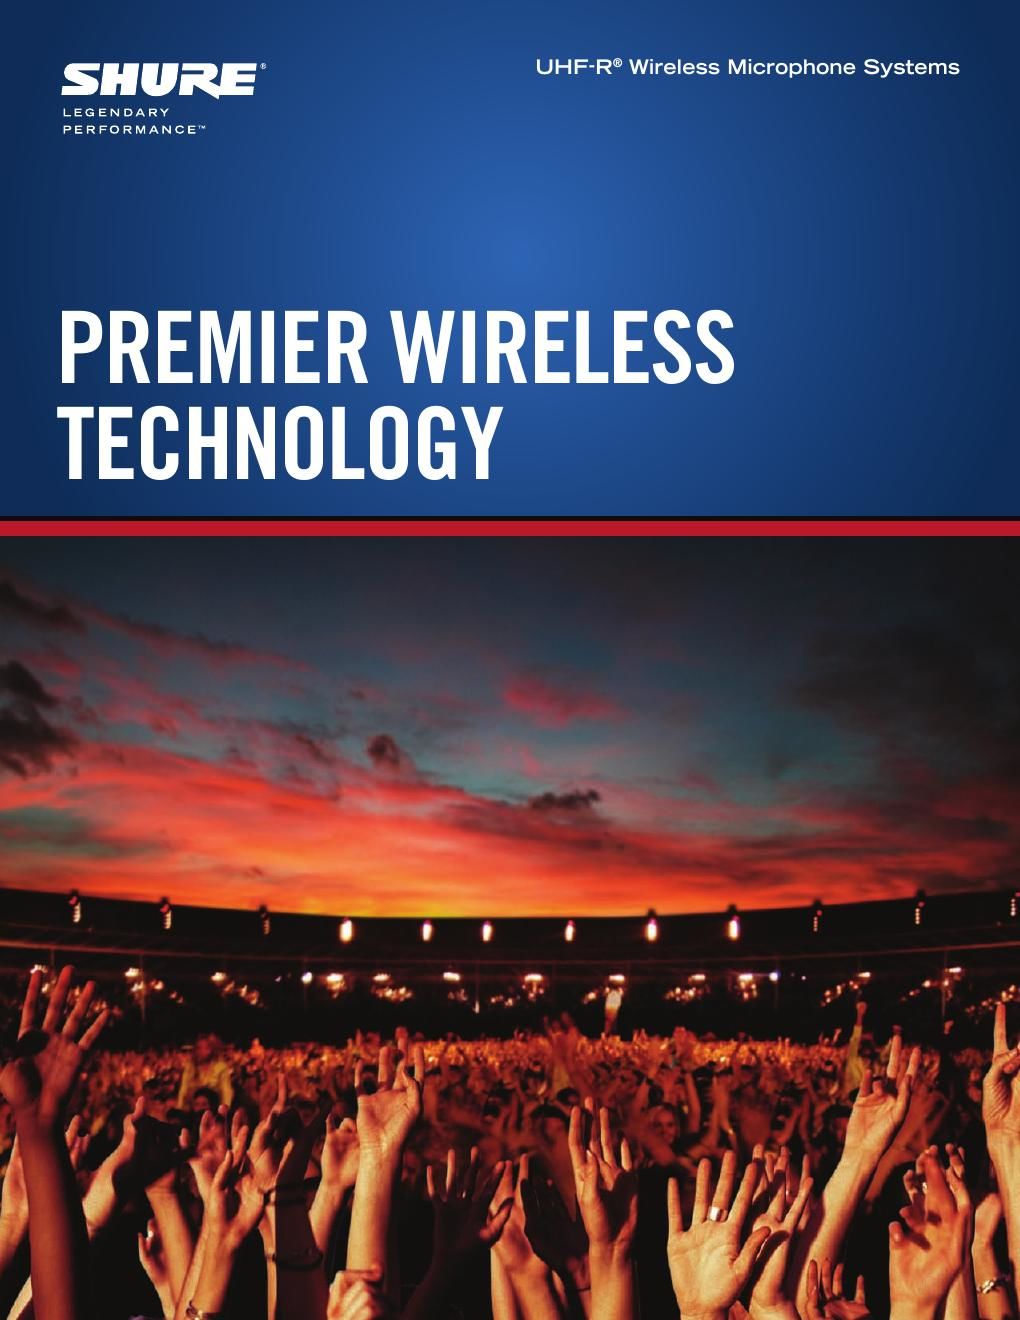 shure uhf r wireless microphone systems 2008 brochure